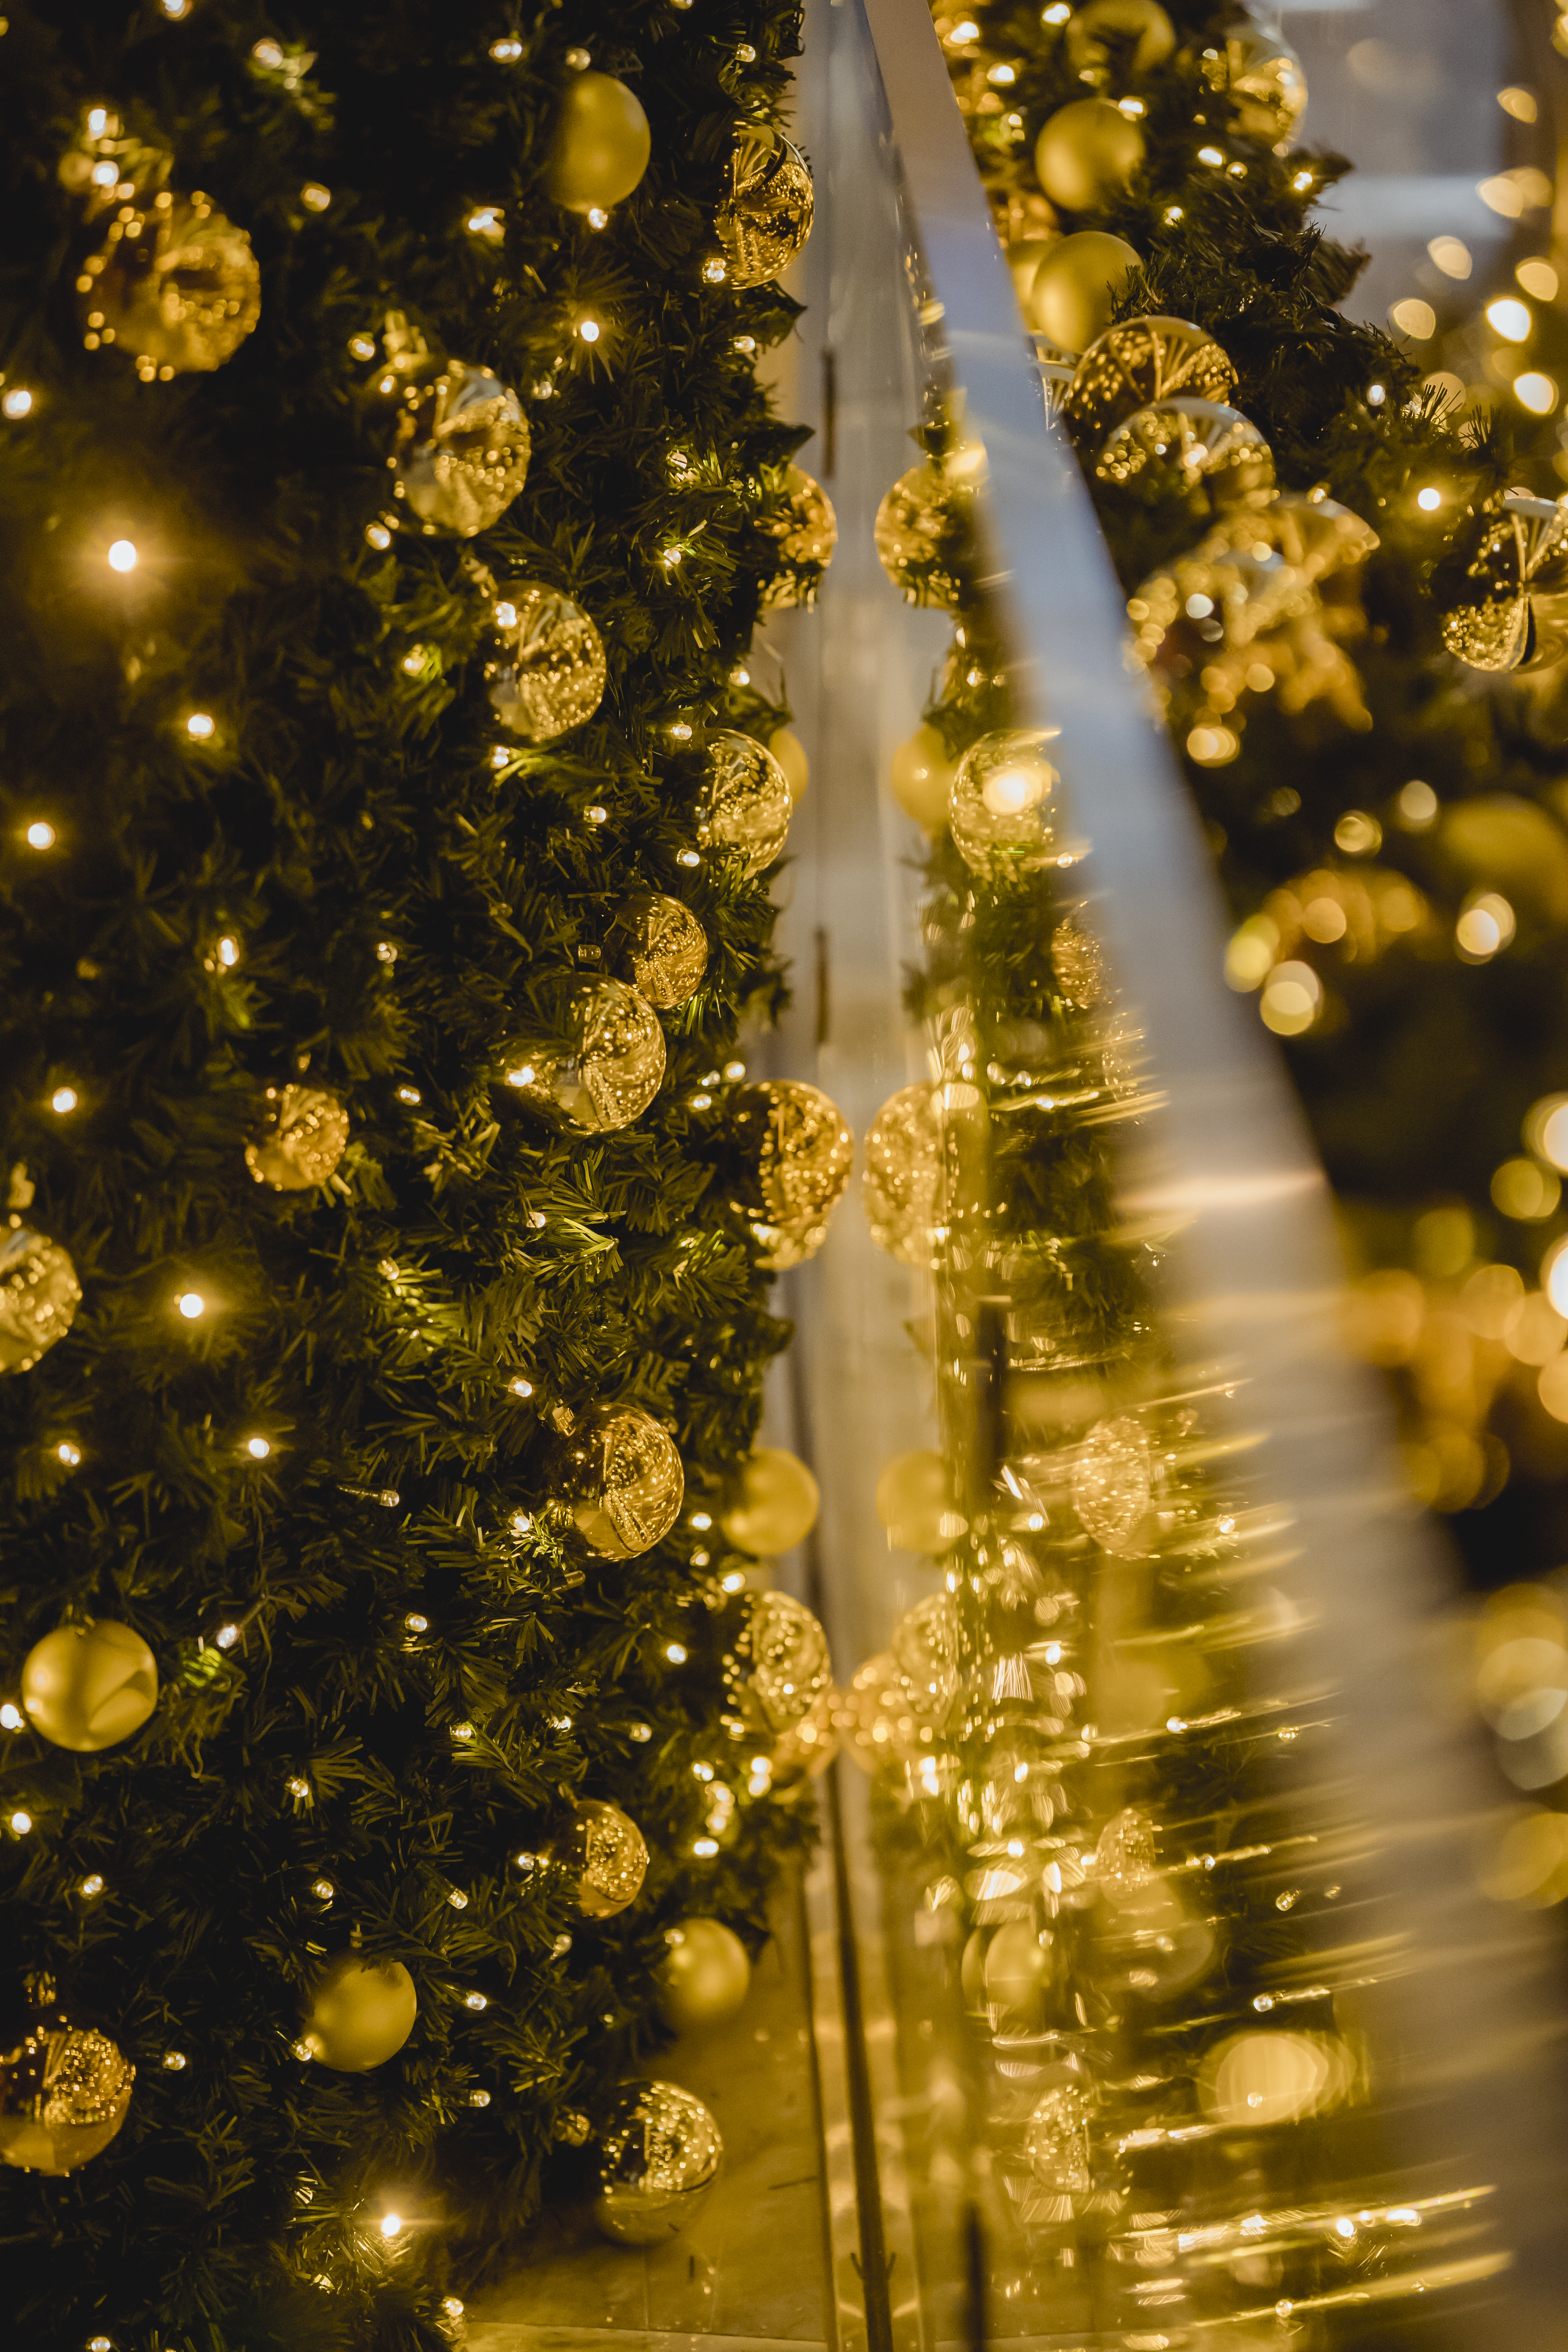 Shiny golden baubles and garland hanging on Christmas tree